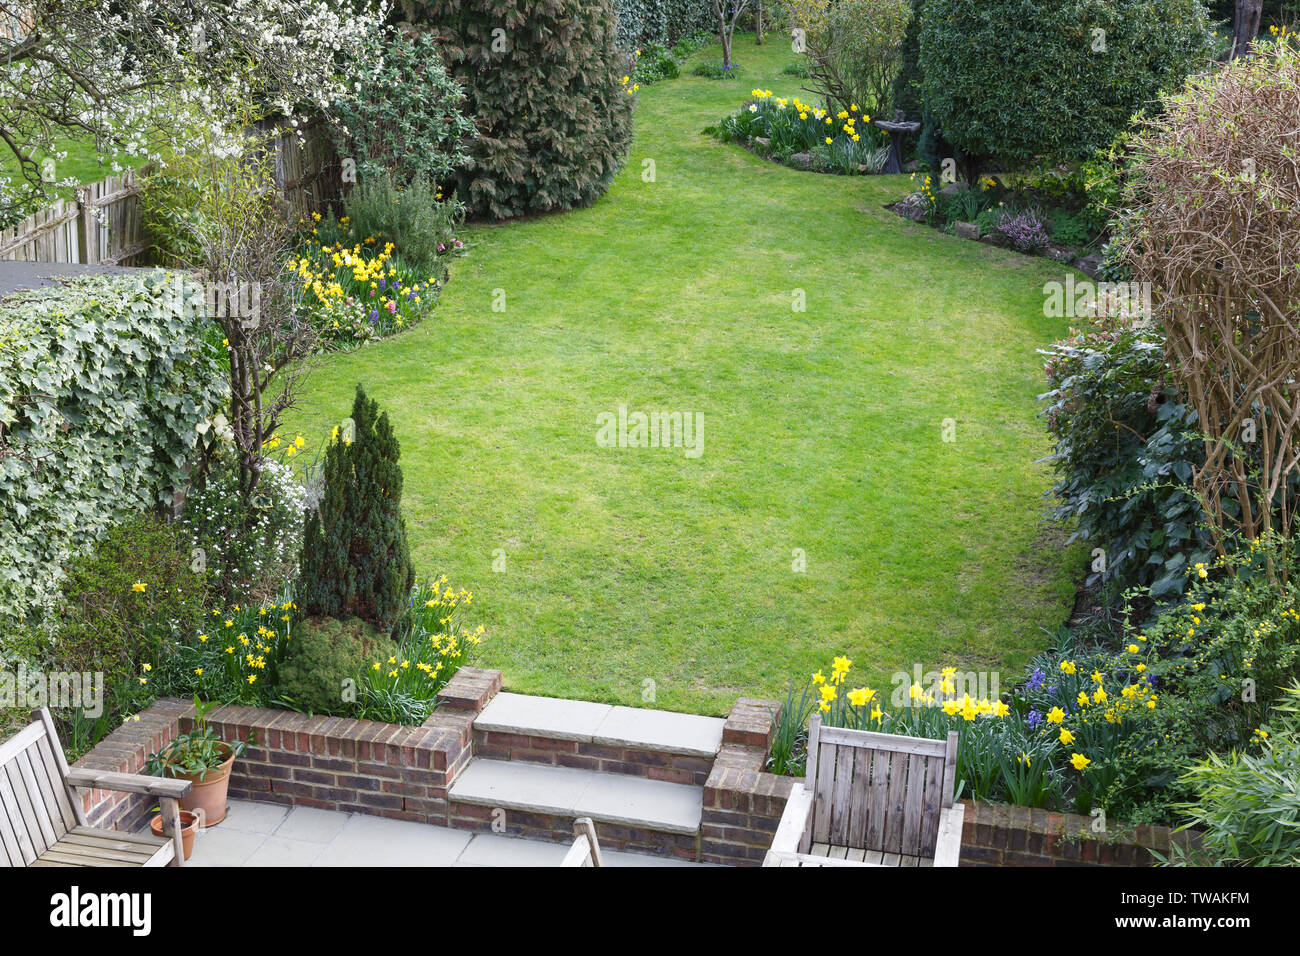 Lawn of a suburban back garden in London England, viewed from above Stock Photo